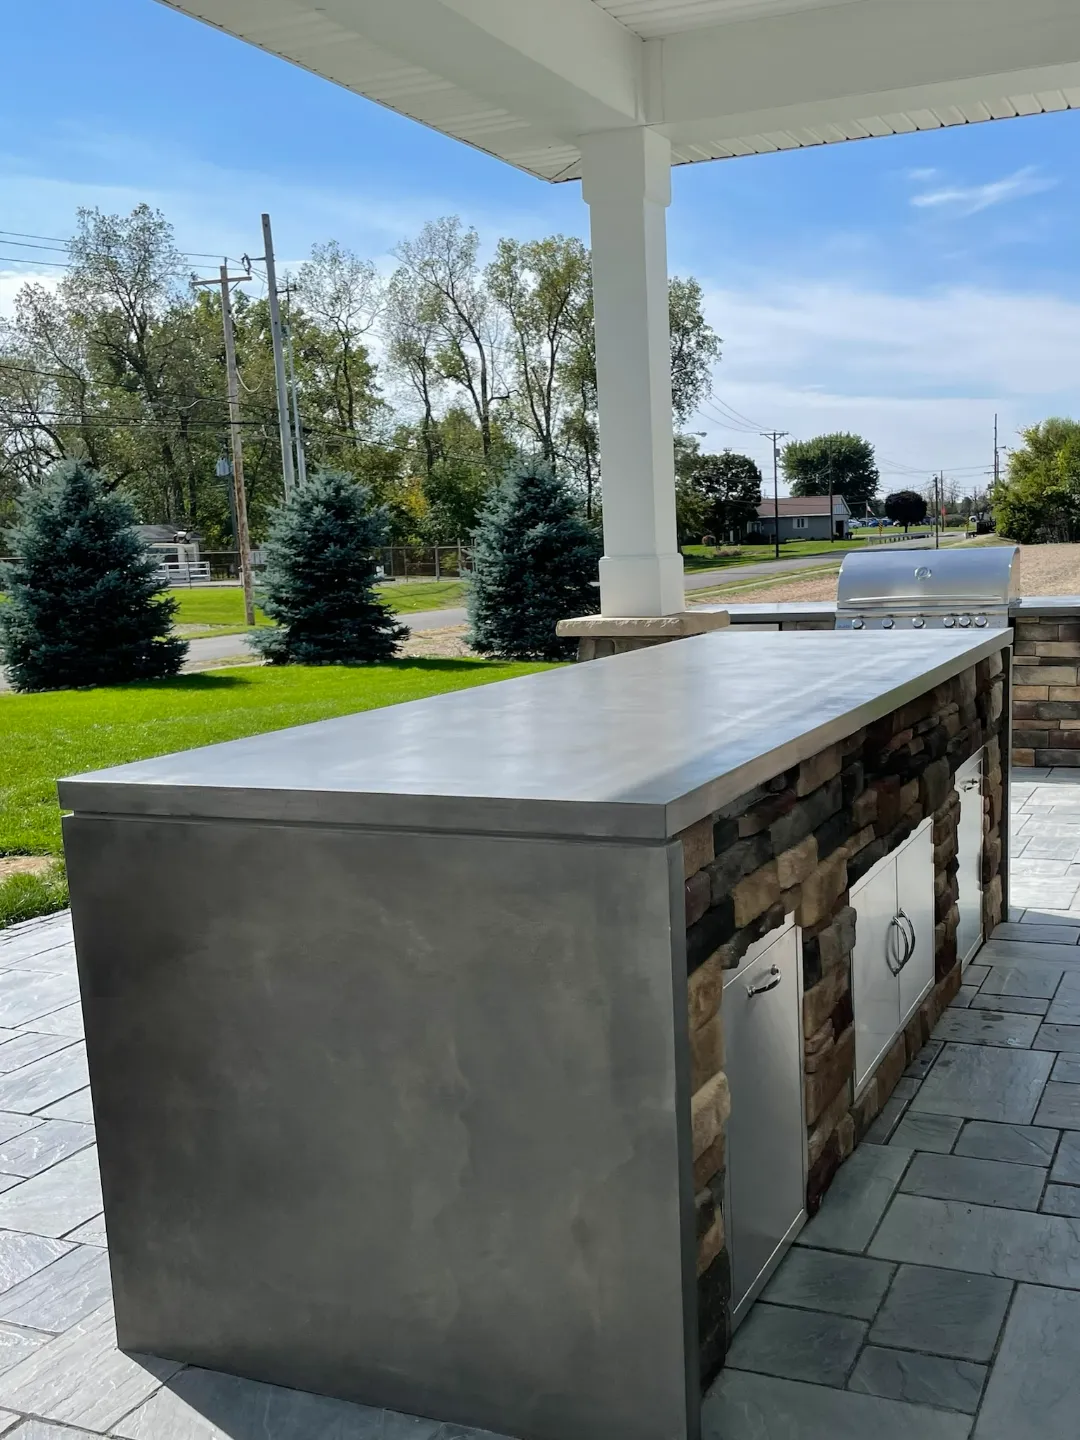 delphos ohio outdoor kitchen project by edgy studios 1